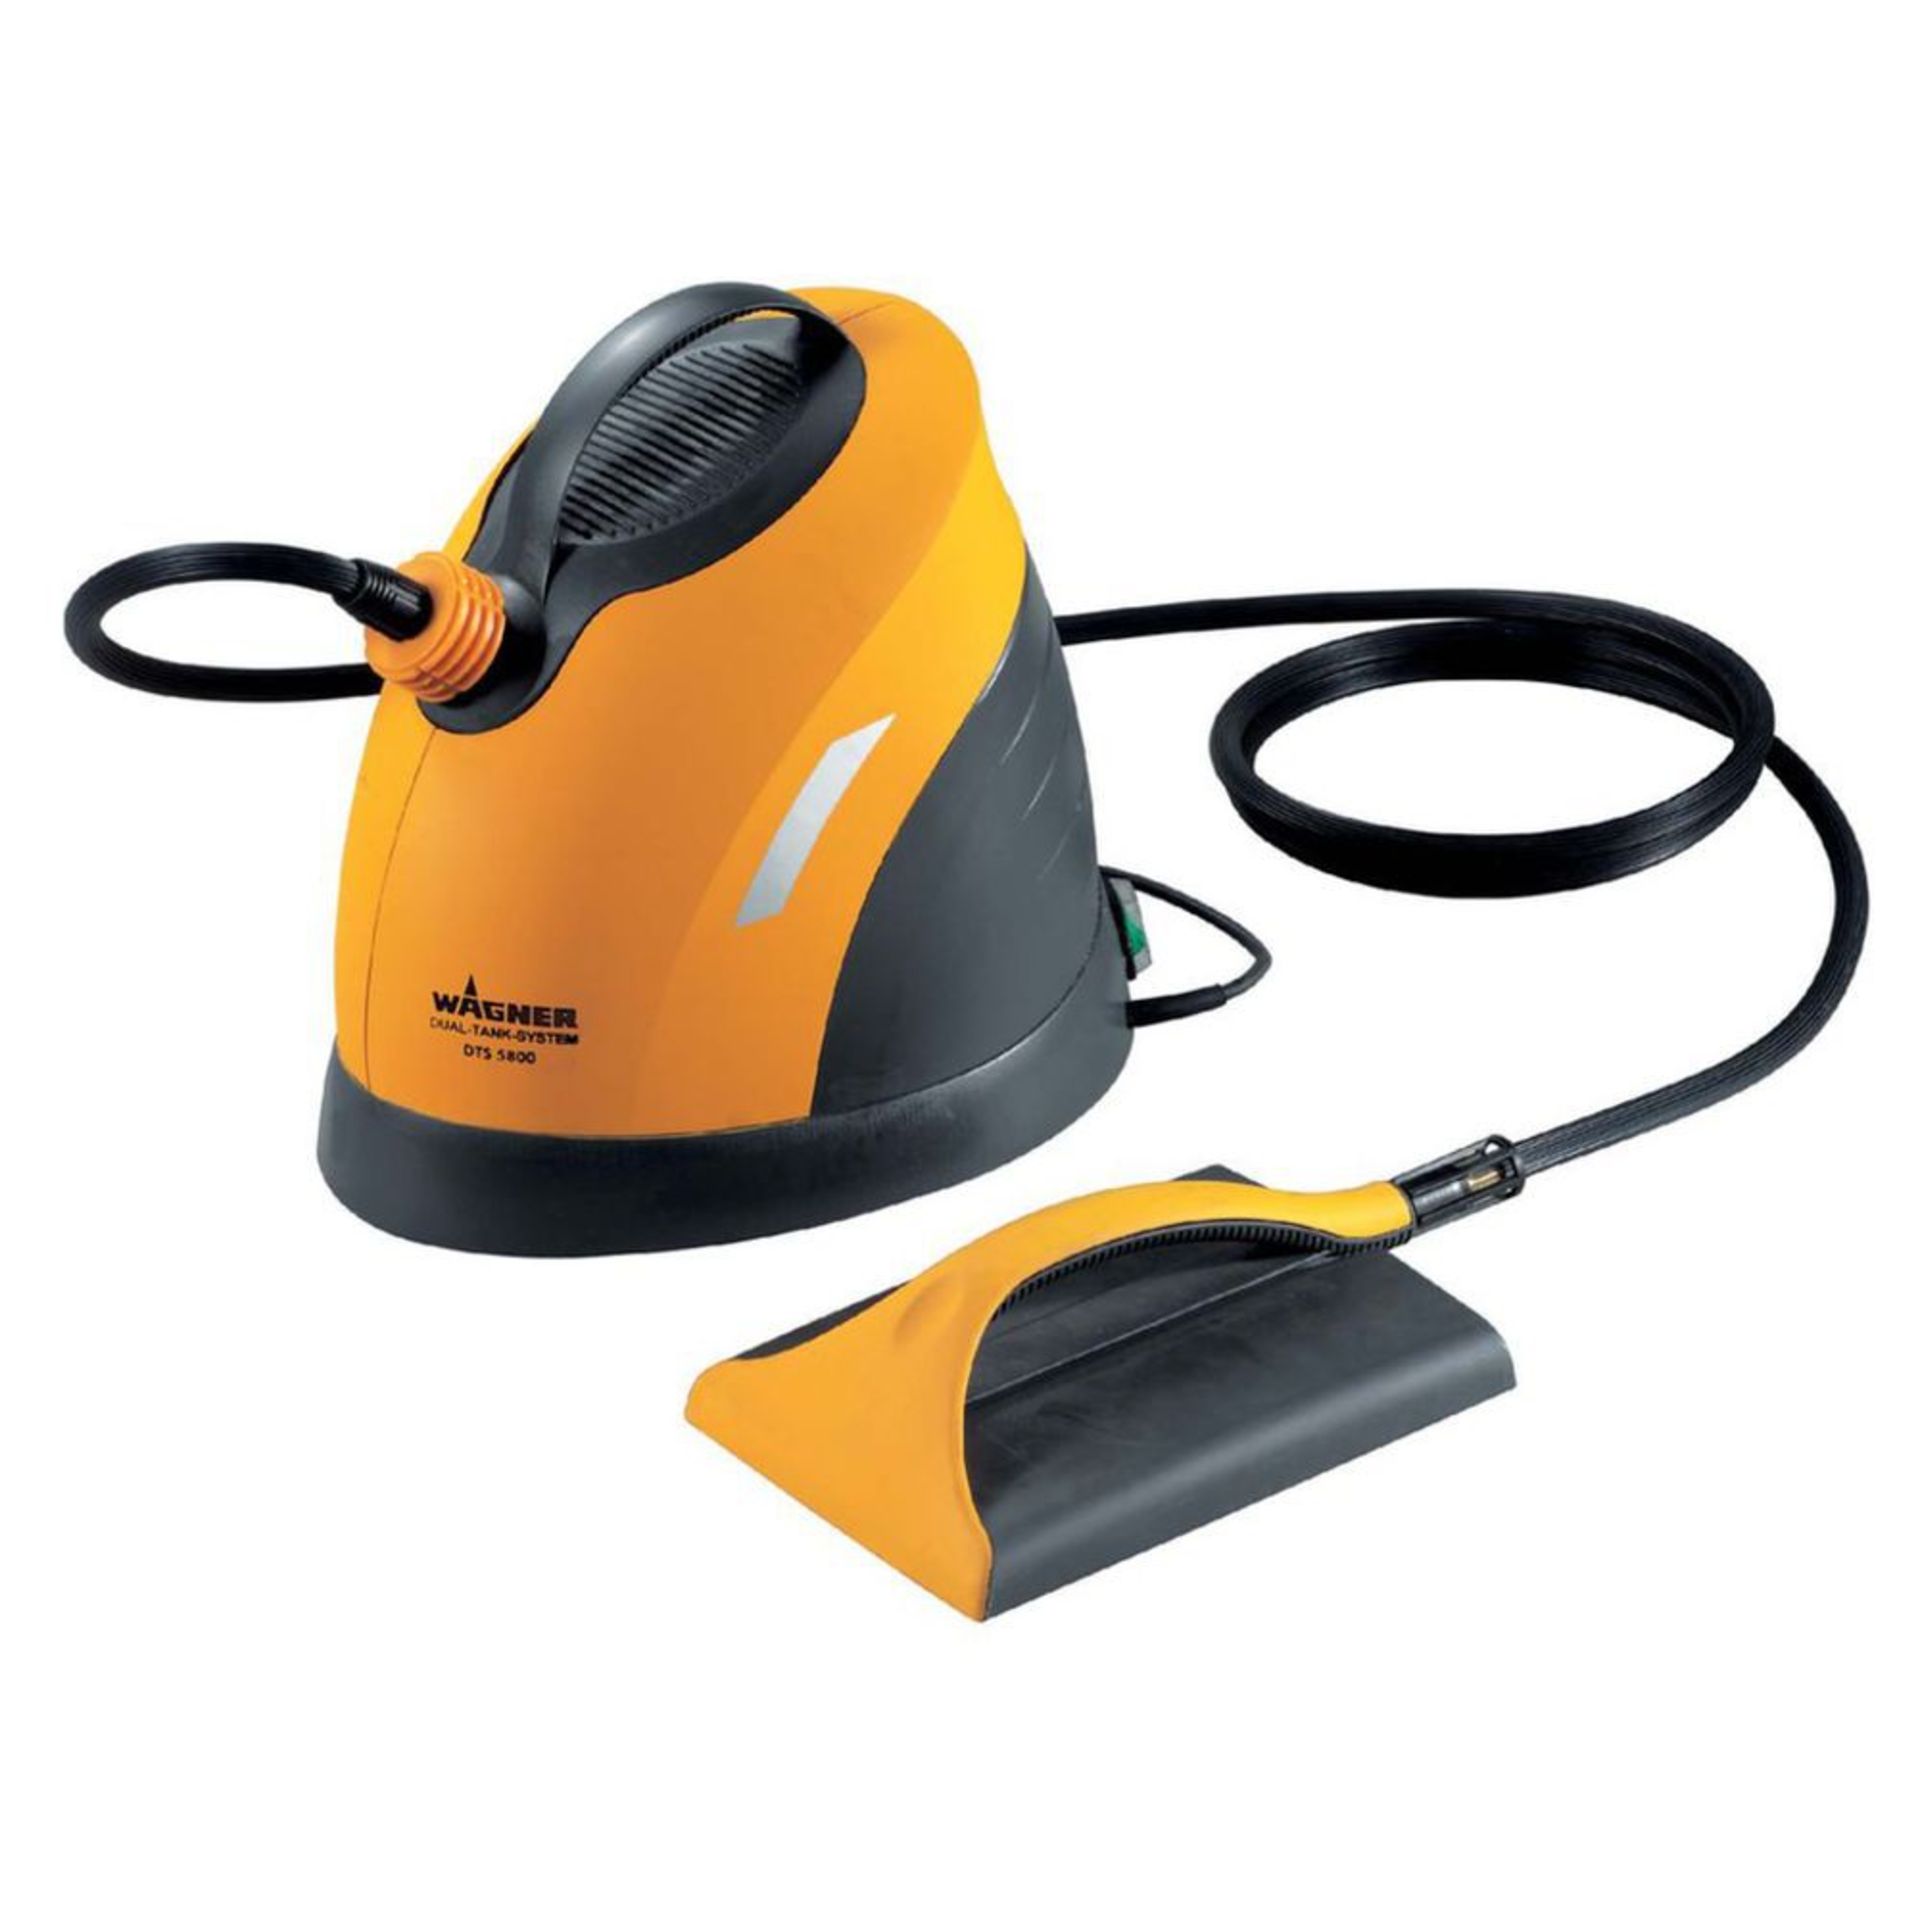 V Grade C Wagner DTS 5800 Dual Tank System Professional Steam Wall Paper Stripper ISP £99.99 (